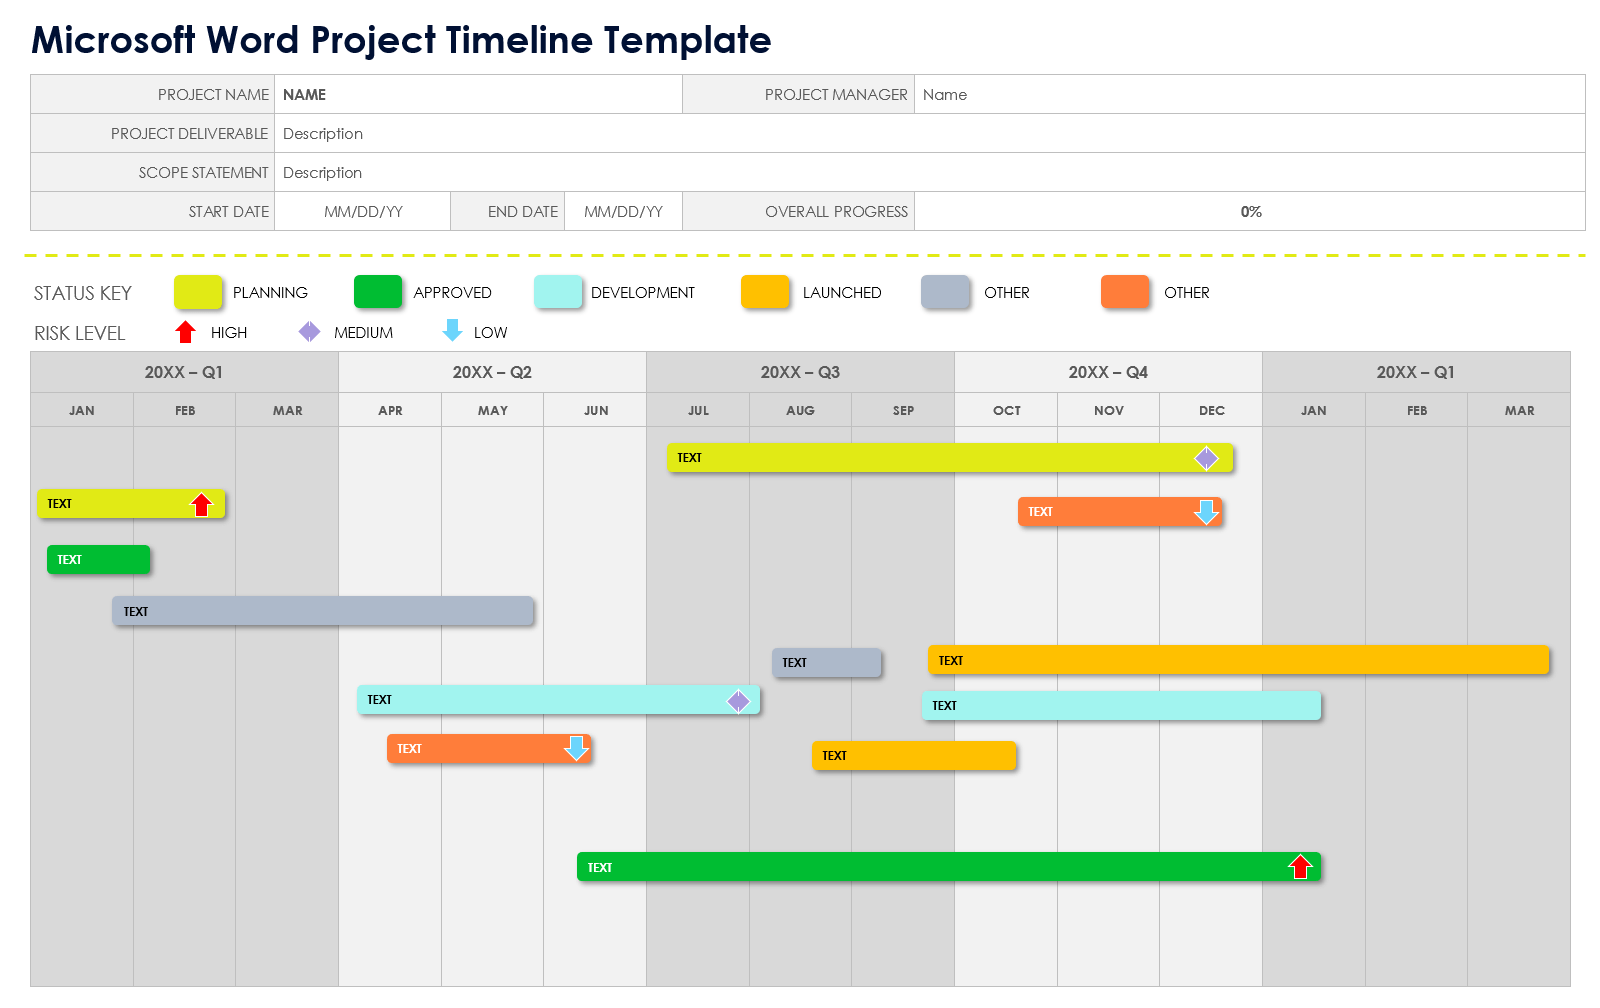 Microsoft Word Project Timeline Template